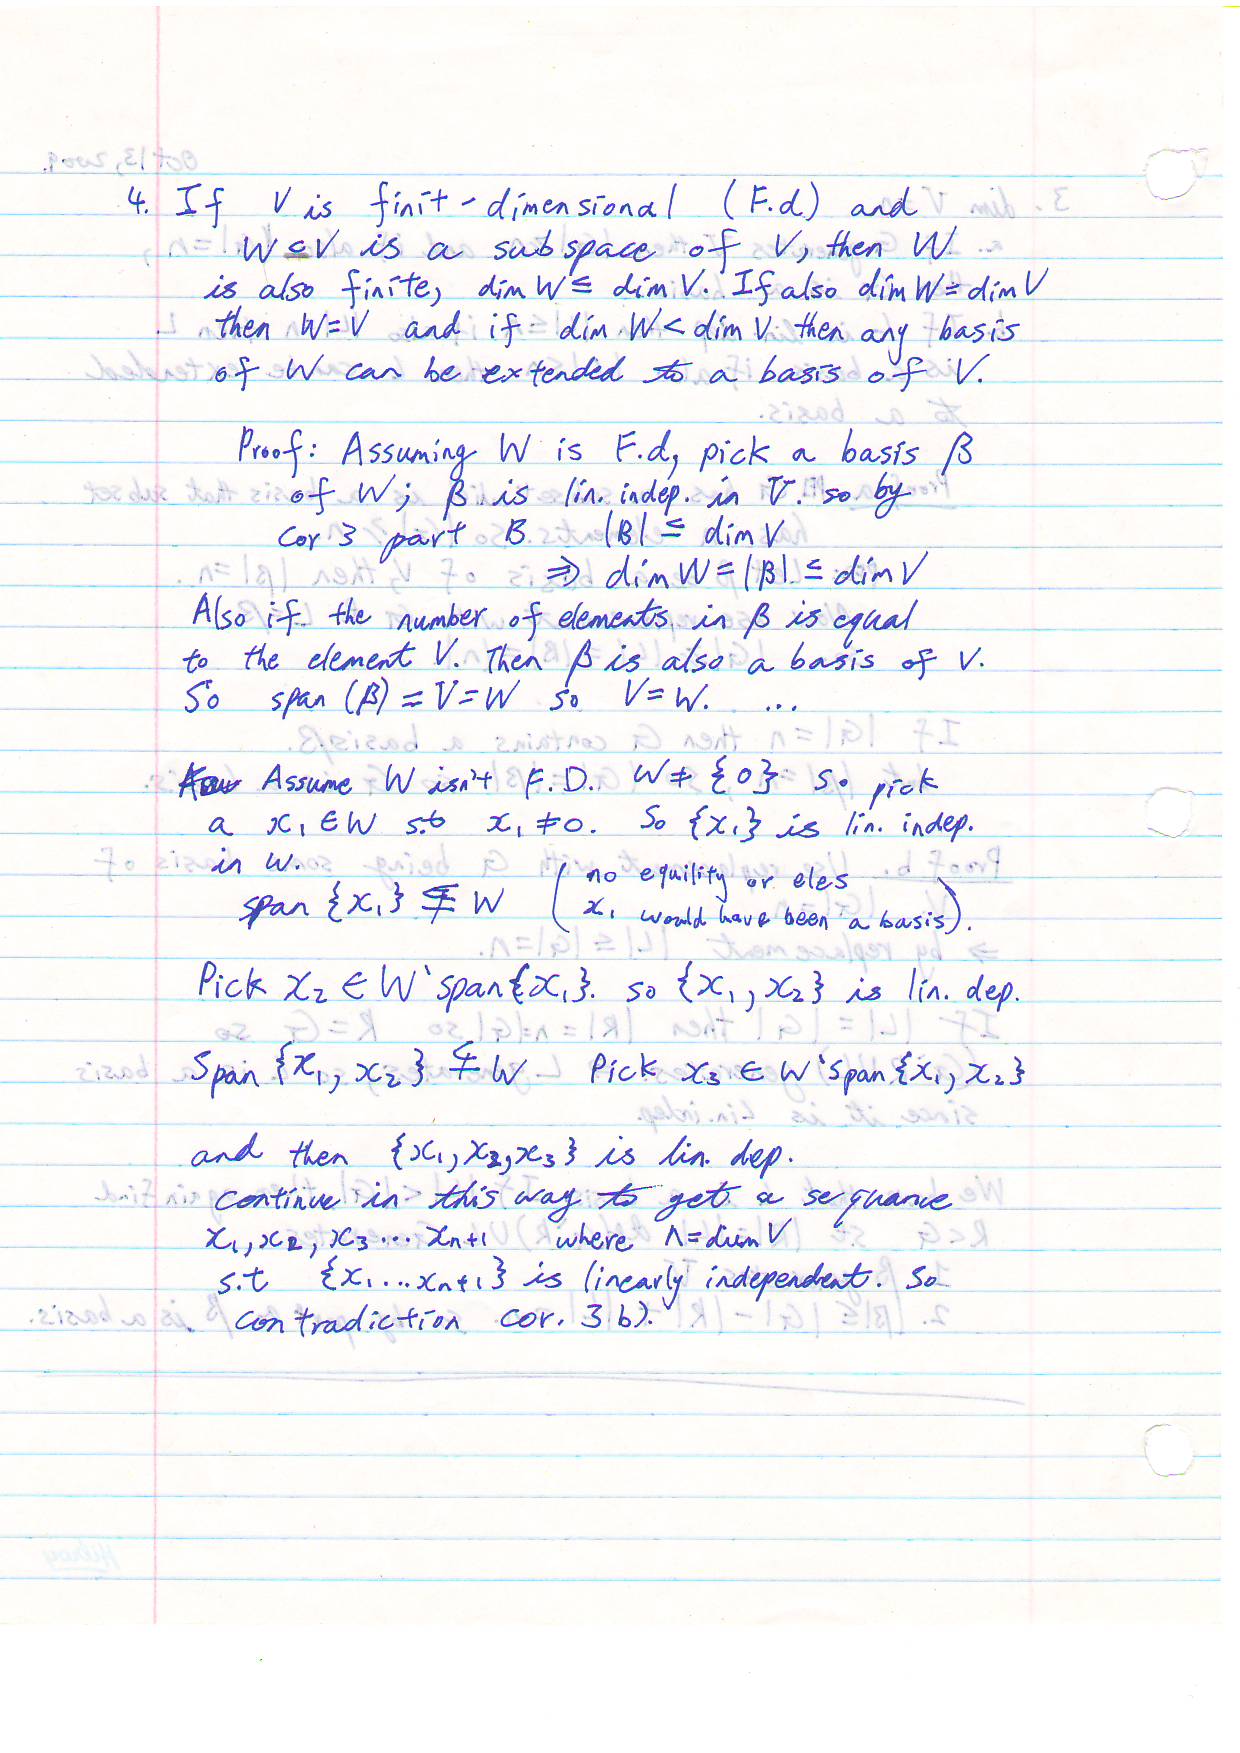 Oct 13 notes page 2.JPG